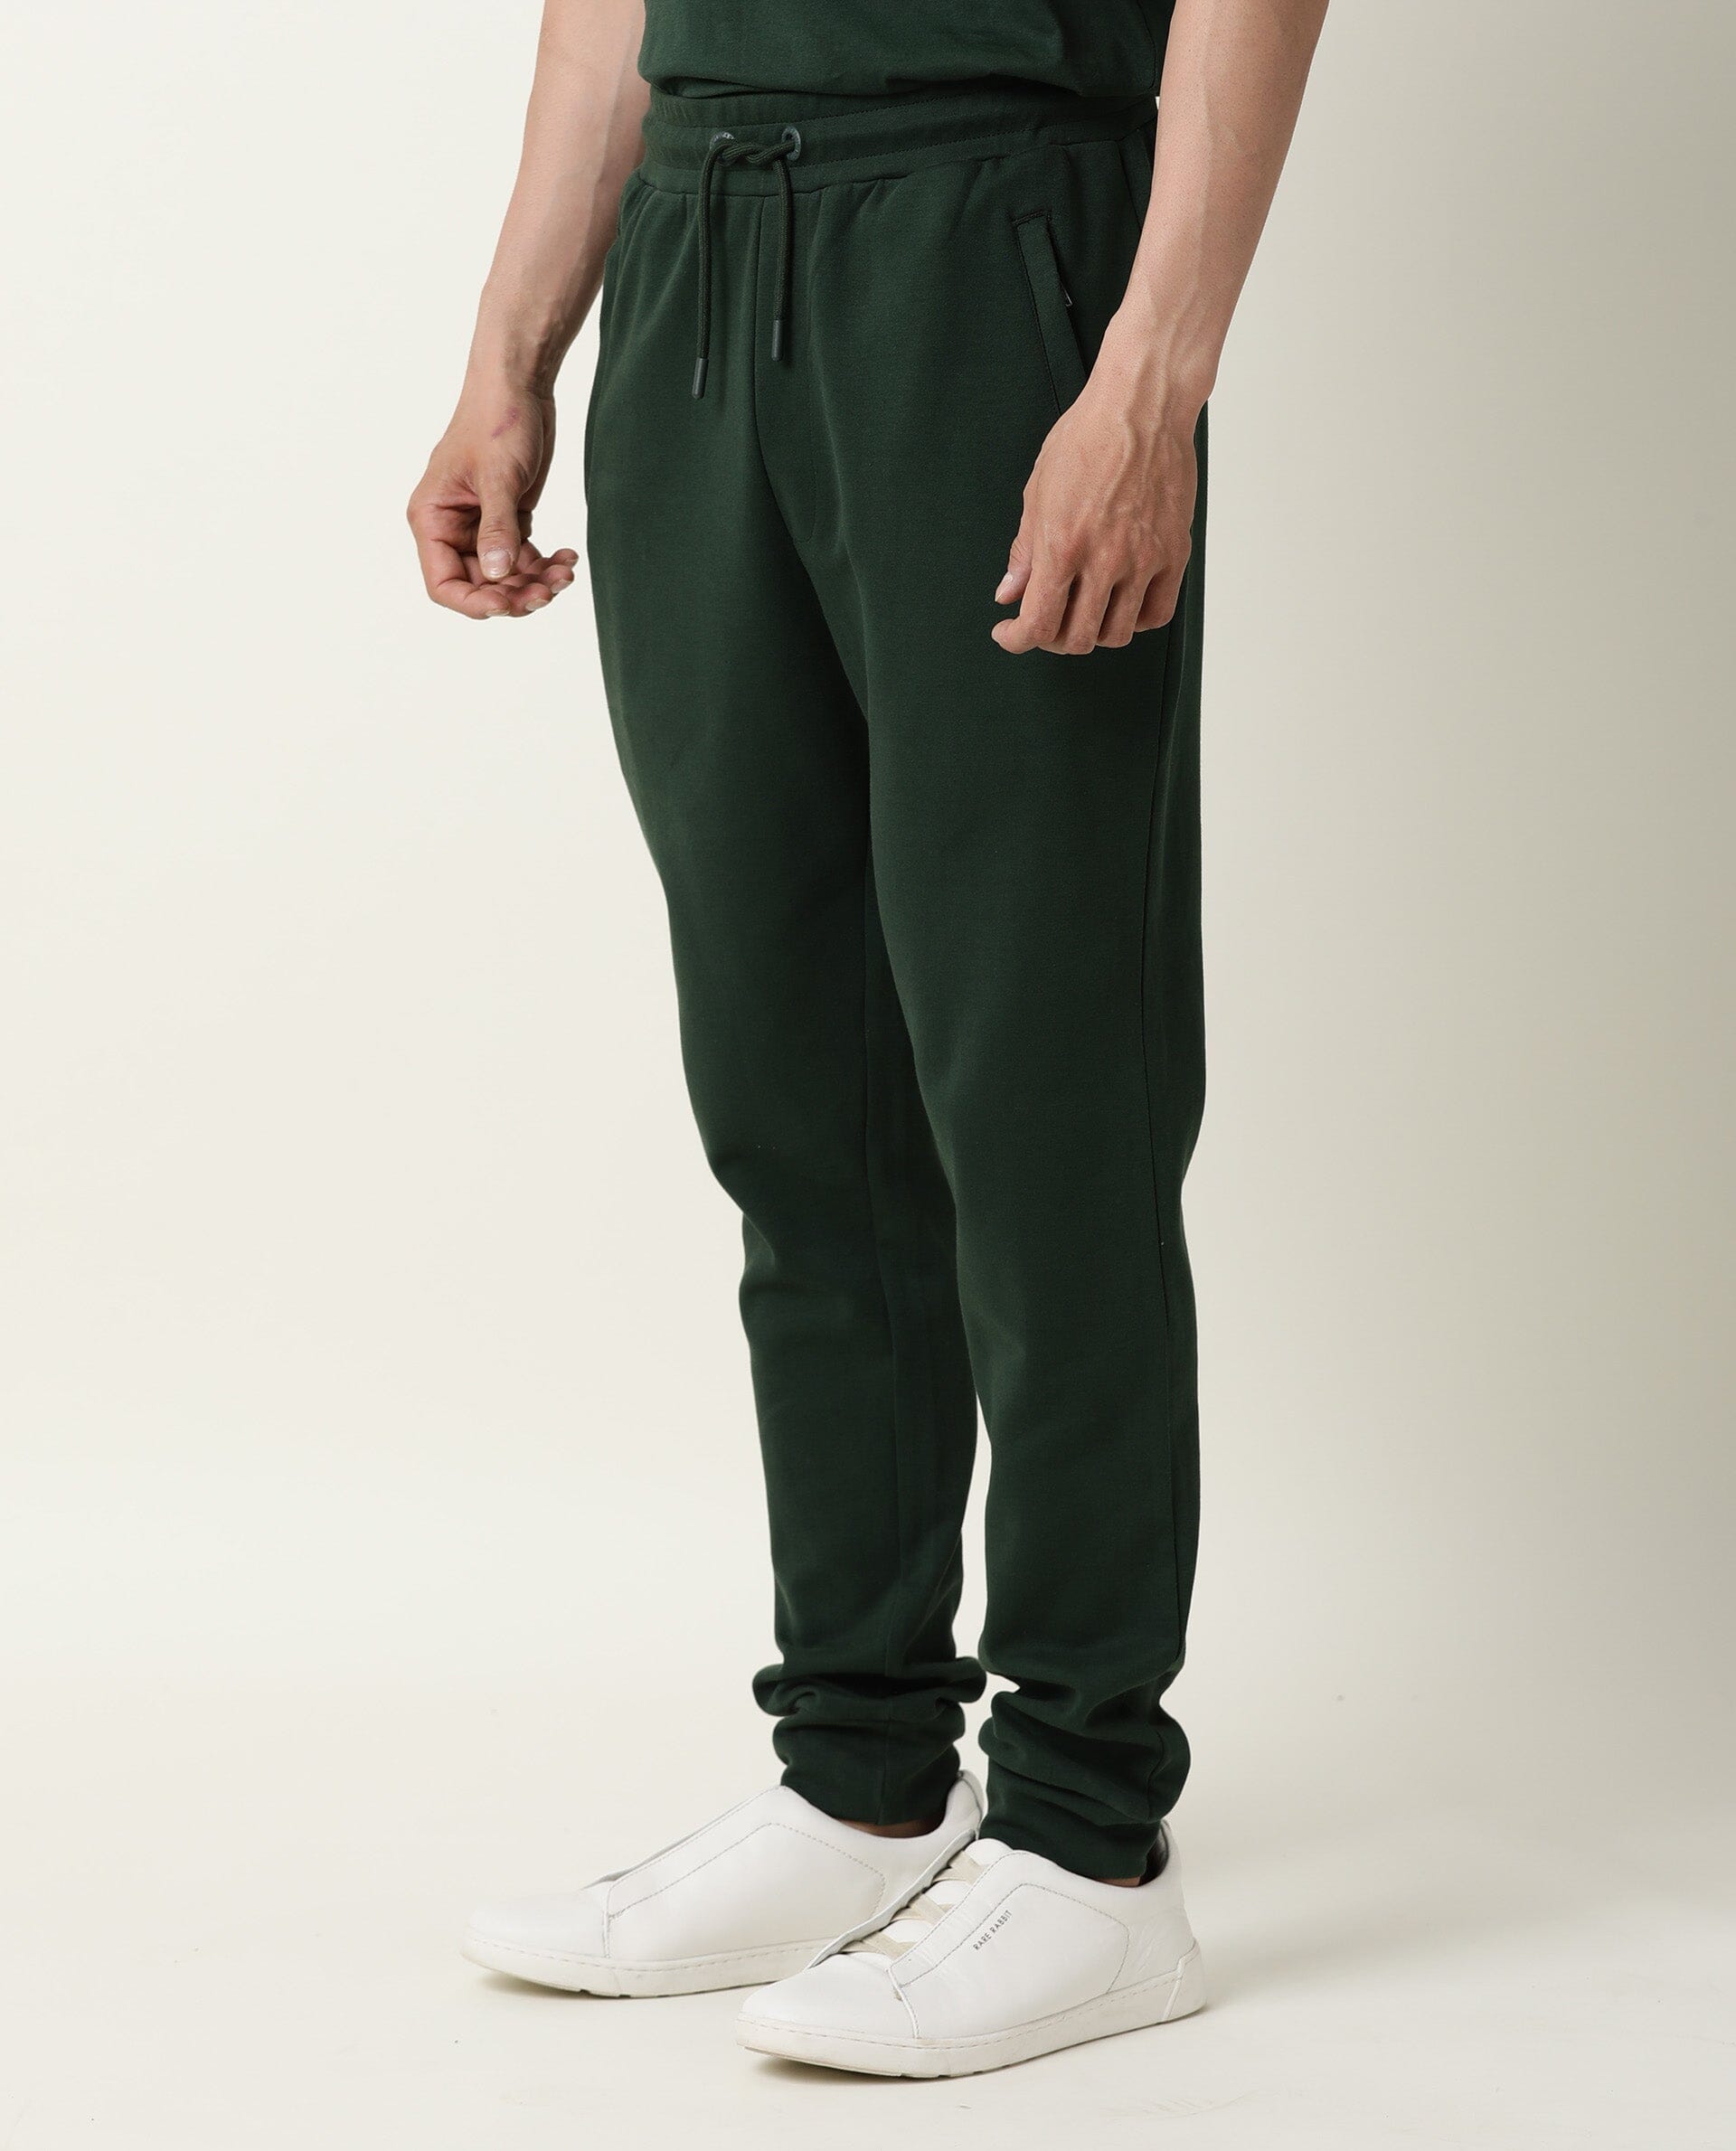 Dark Green Arctic Track Pants by LNDR for $40